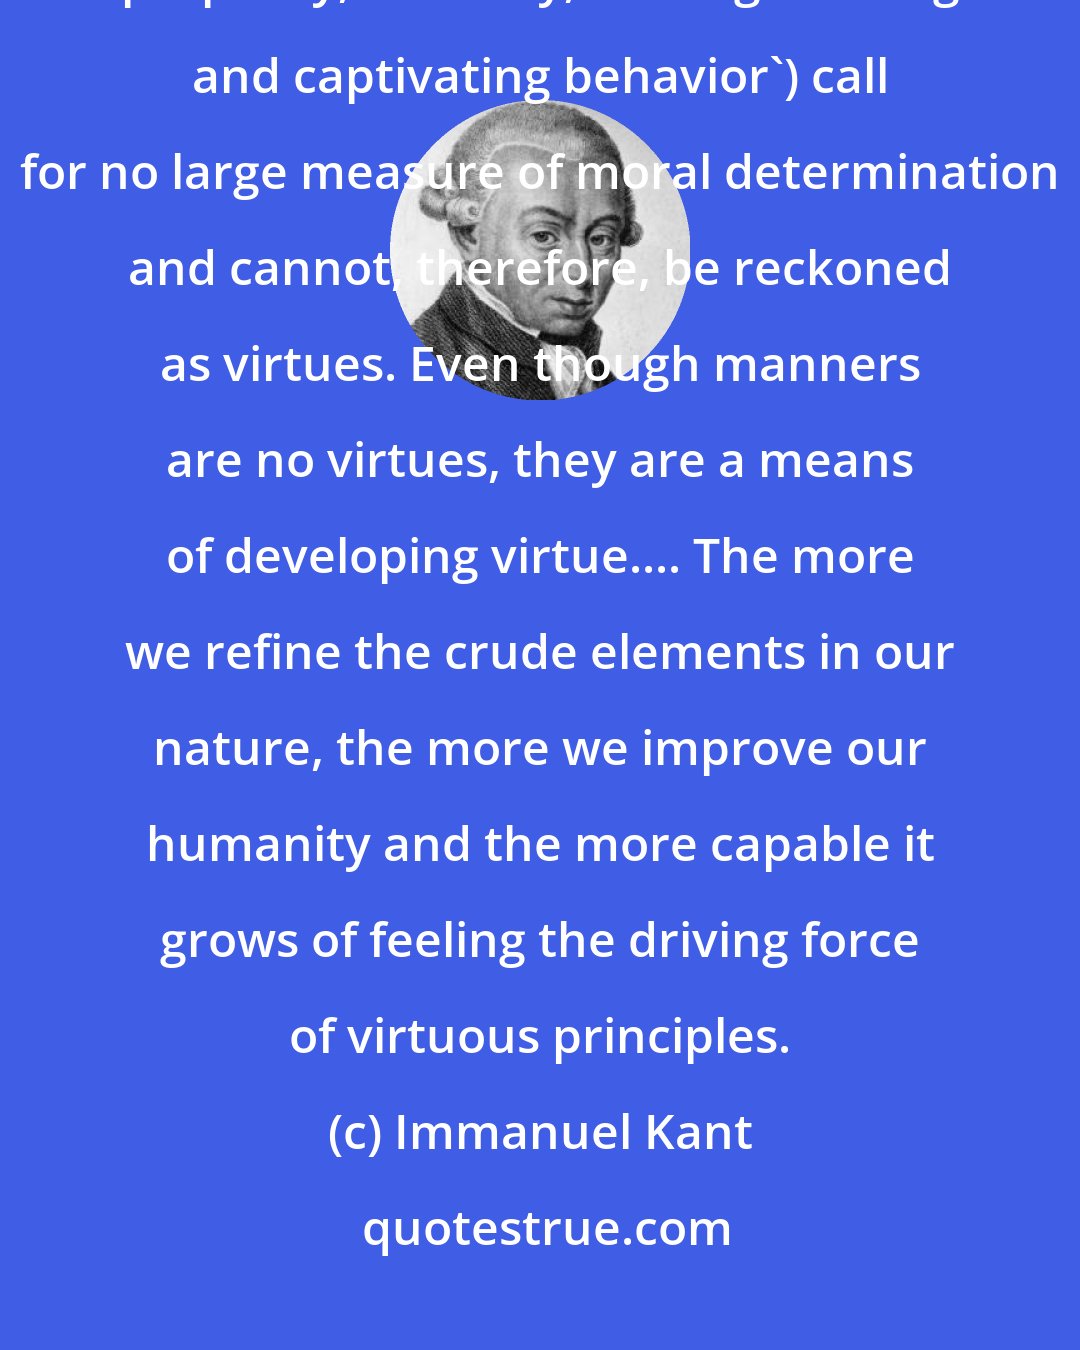 Immanuel Kant: Manners or etiquette ('accessibility, affability, politeness, refinement, propriety, courtesy, and ingratiating and captivating behavior') call for no large measure of moral determination and cannot, therefore, be reckoned as virtues. Even though manners are no virtues, they are a means of developing virtue.... The more we refine the crude elements in our nature, the more we improve our humanity and the more capable it grows of feeling the driving force of virtuous principles.